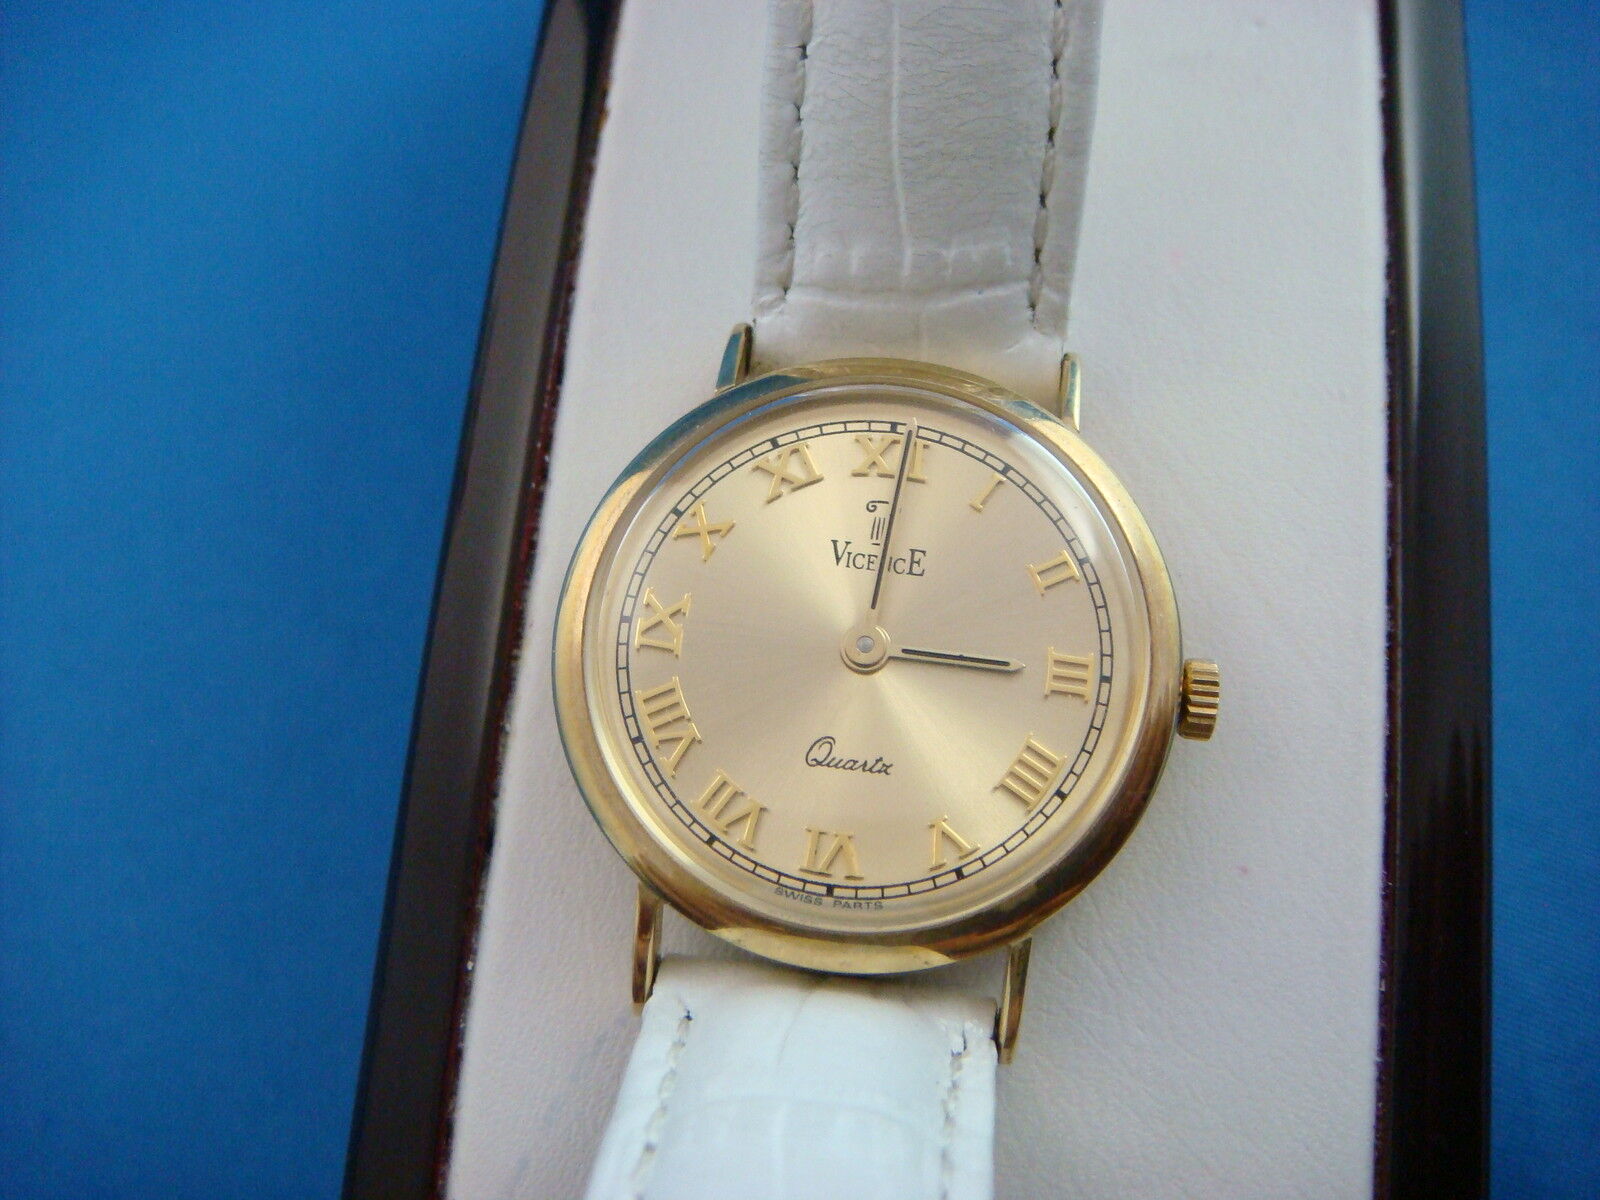 VICENCE 14K YELLOW GOLD ROUND WATCH WITH WHITE LEATHER BAND MADE IN ITALY